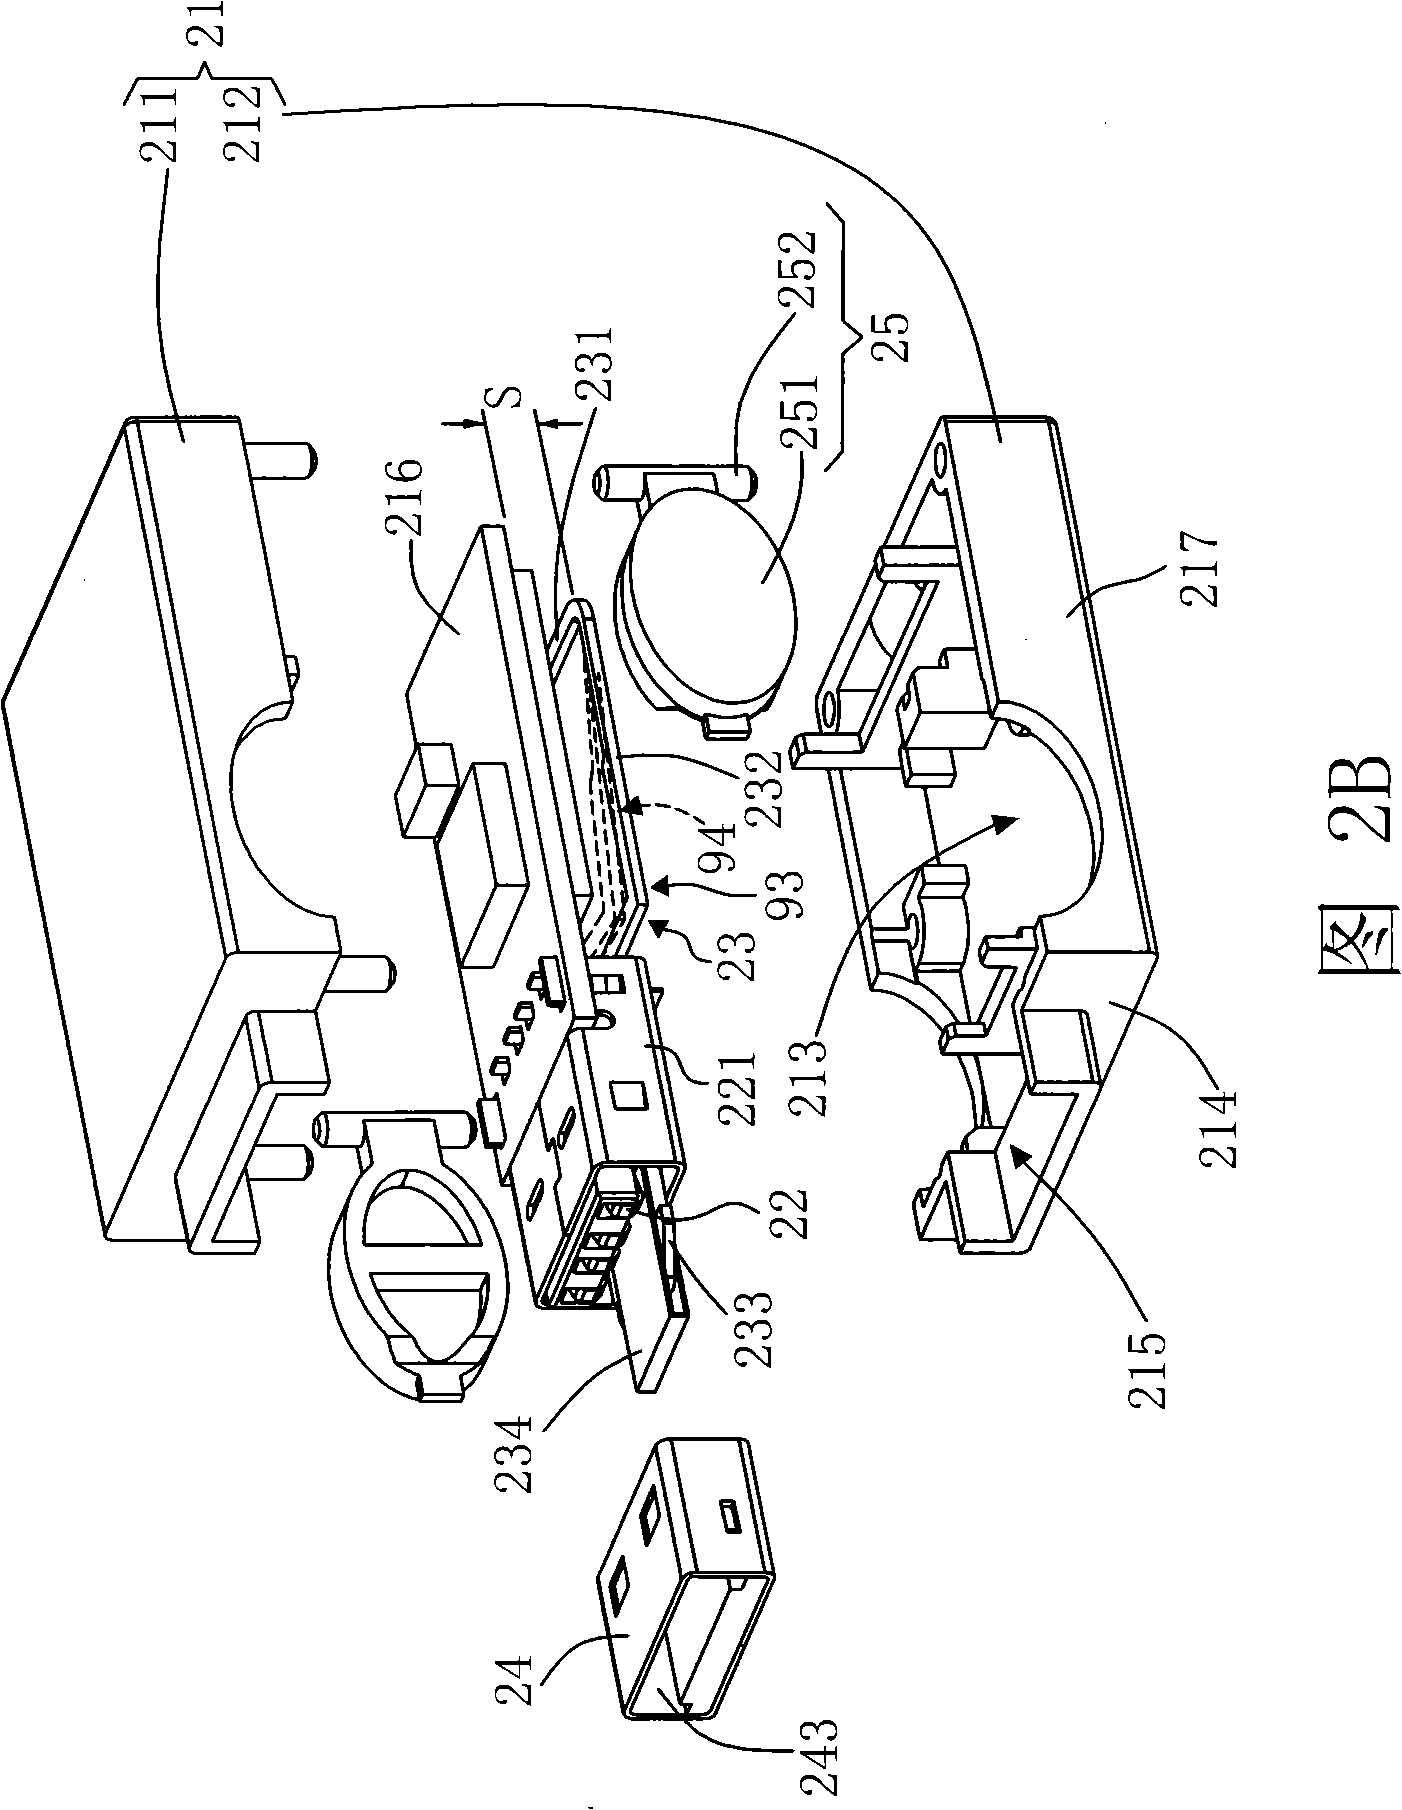 Anti-copy data device with duplexing joint